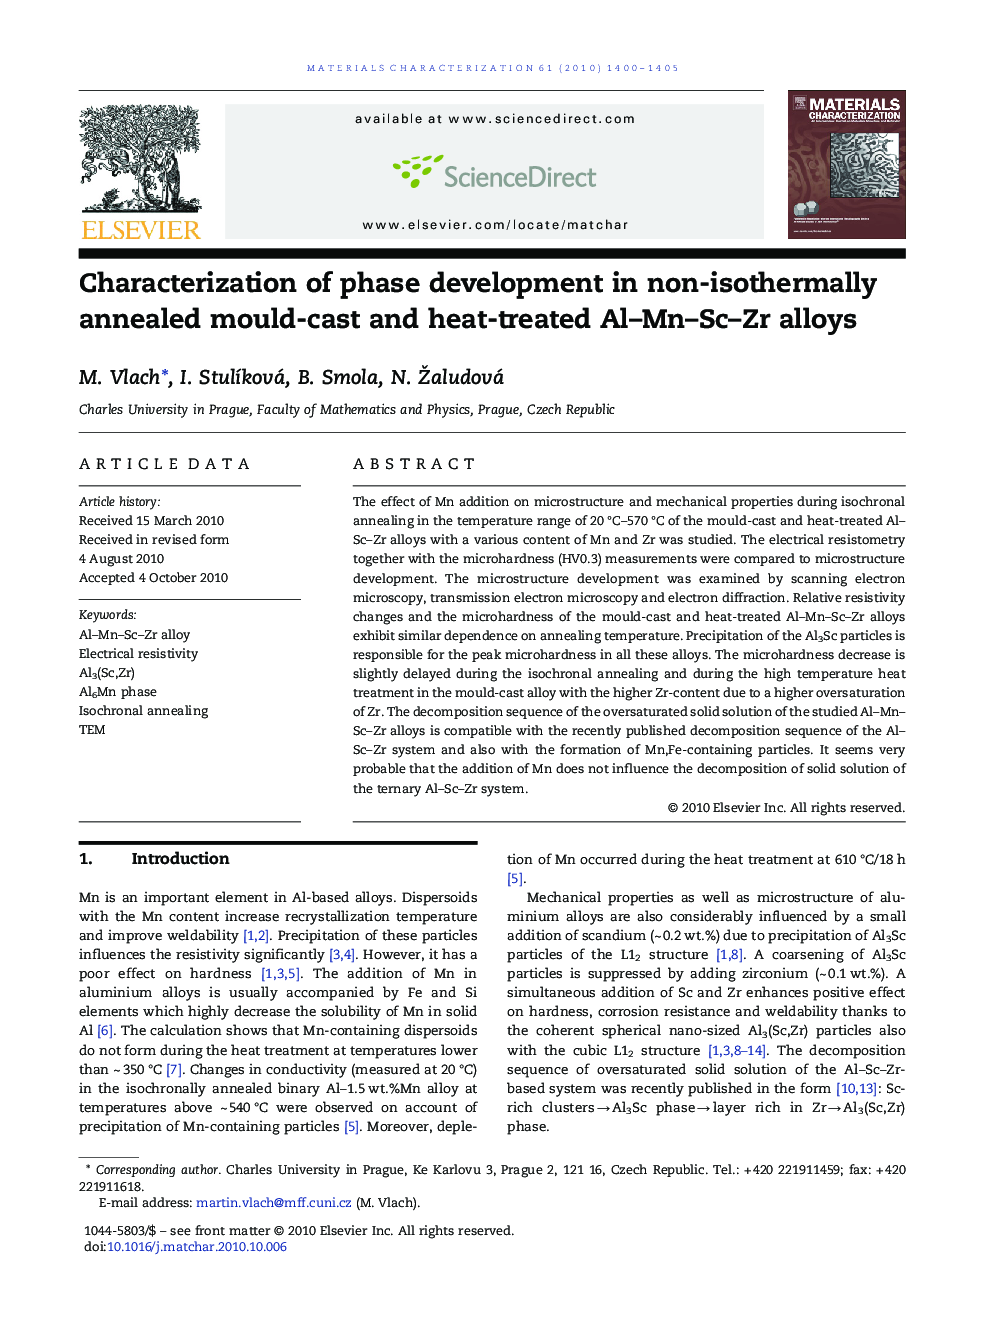 Characterization of phase development in non-isothermally annealed mould-cast and heat-treated Al–Mn–Sc–Zr alloys